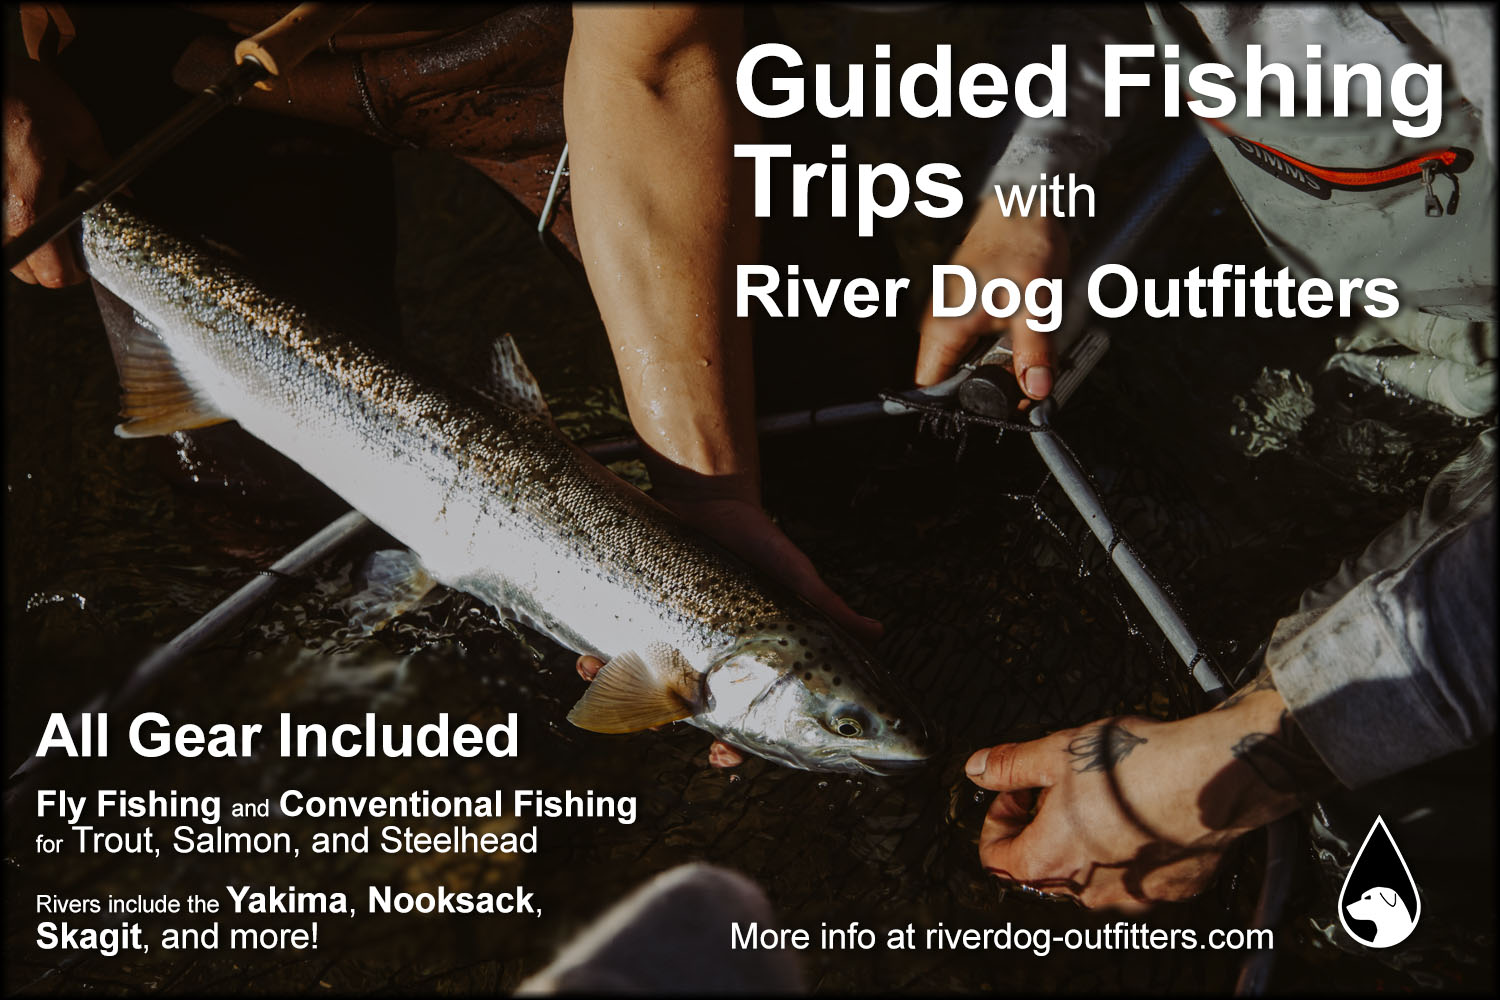 guided fishing trips river dog outfitters